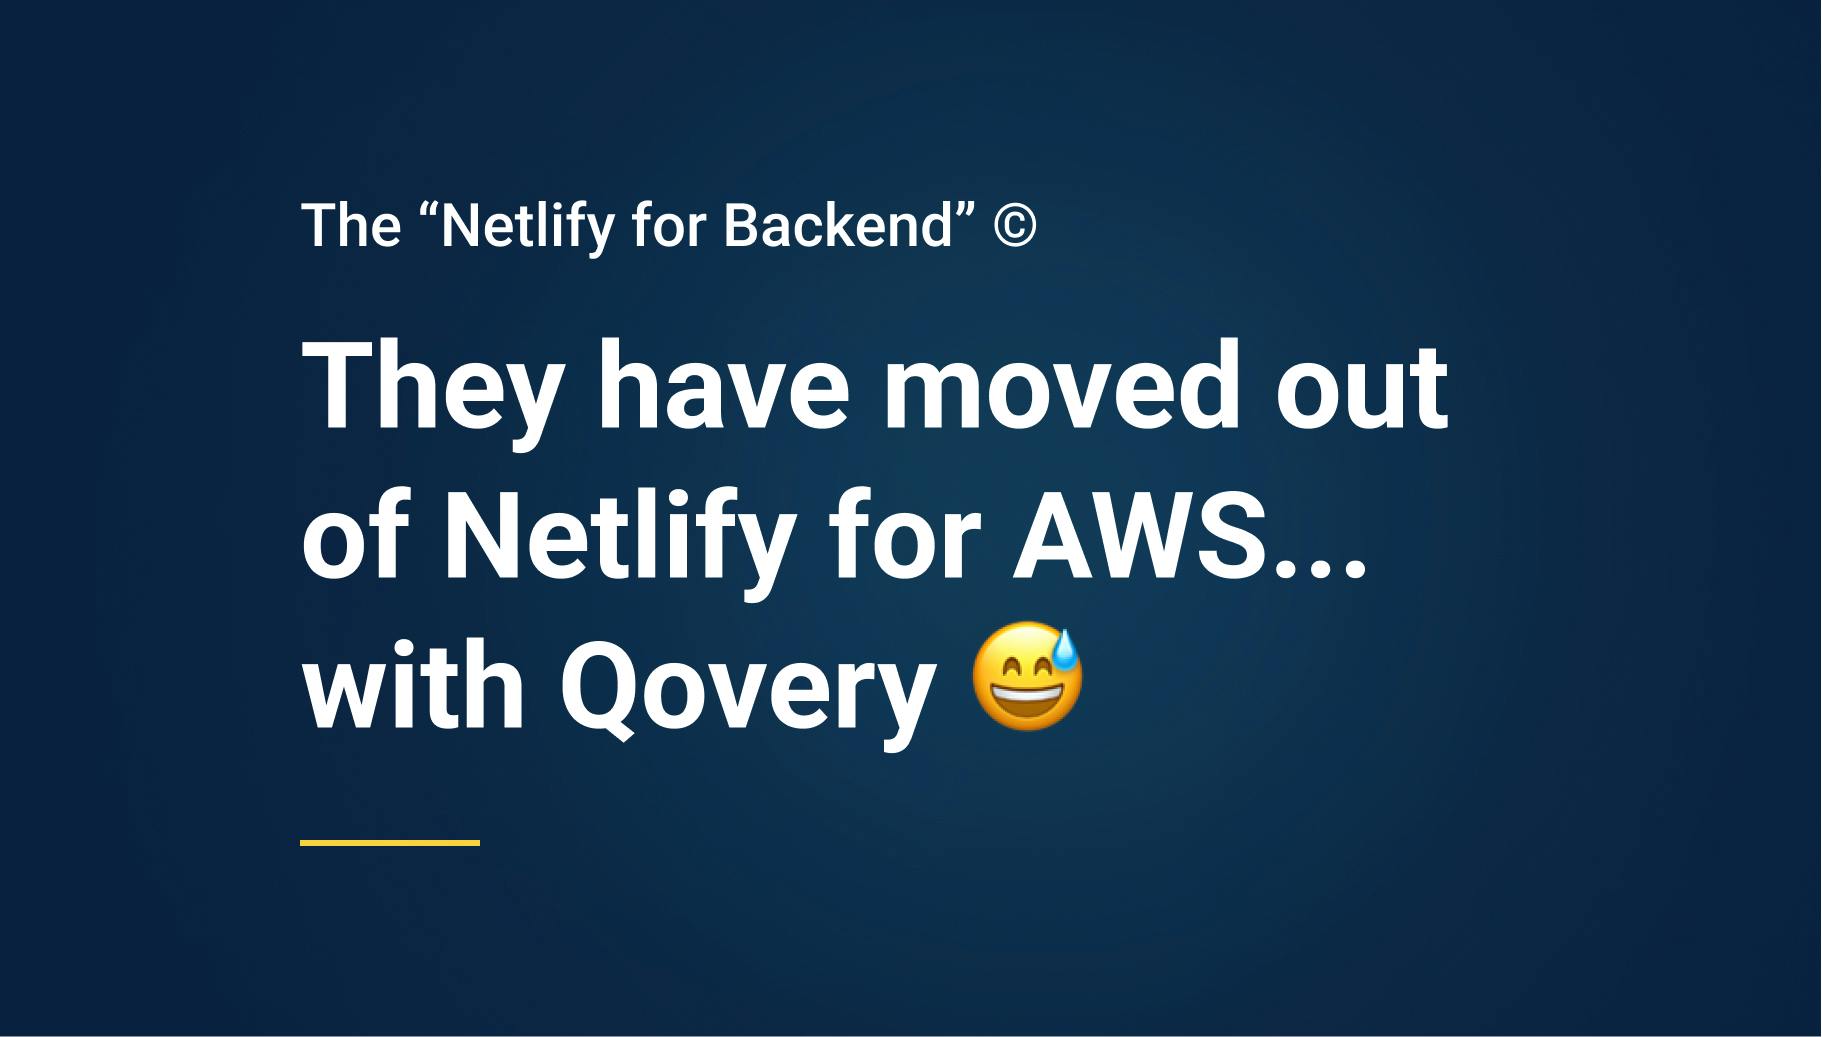 We built the "Netlify for backend" that runs on your AWS account! - Qovery